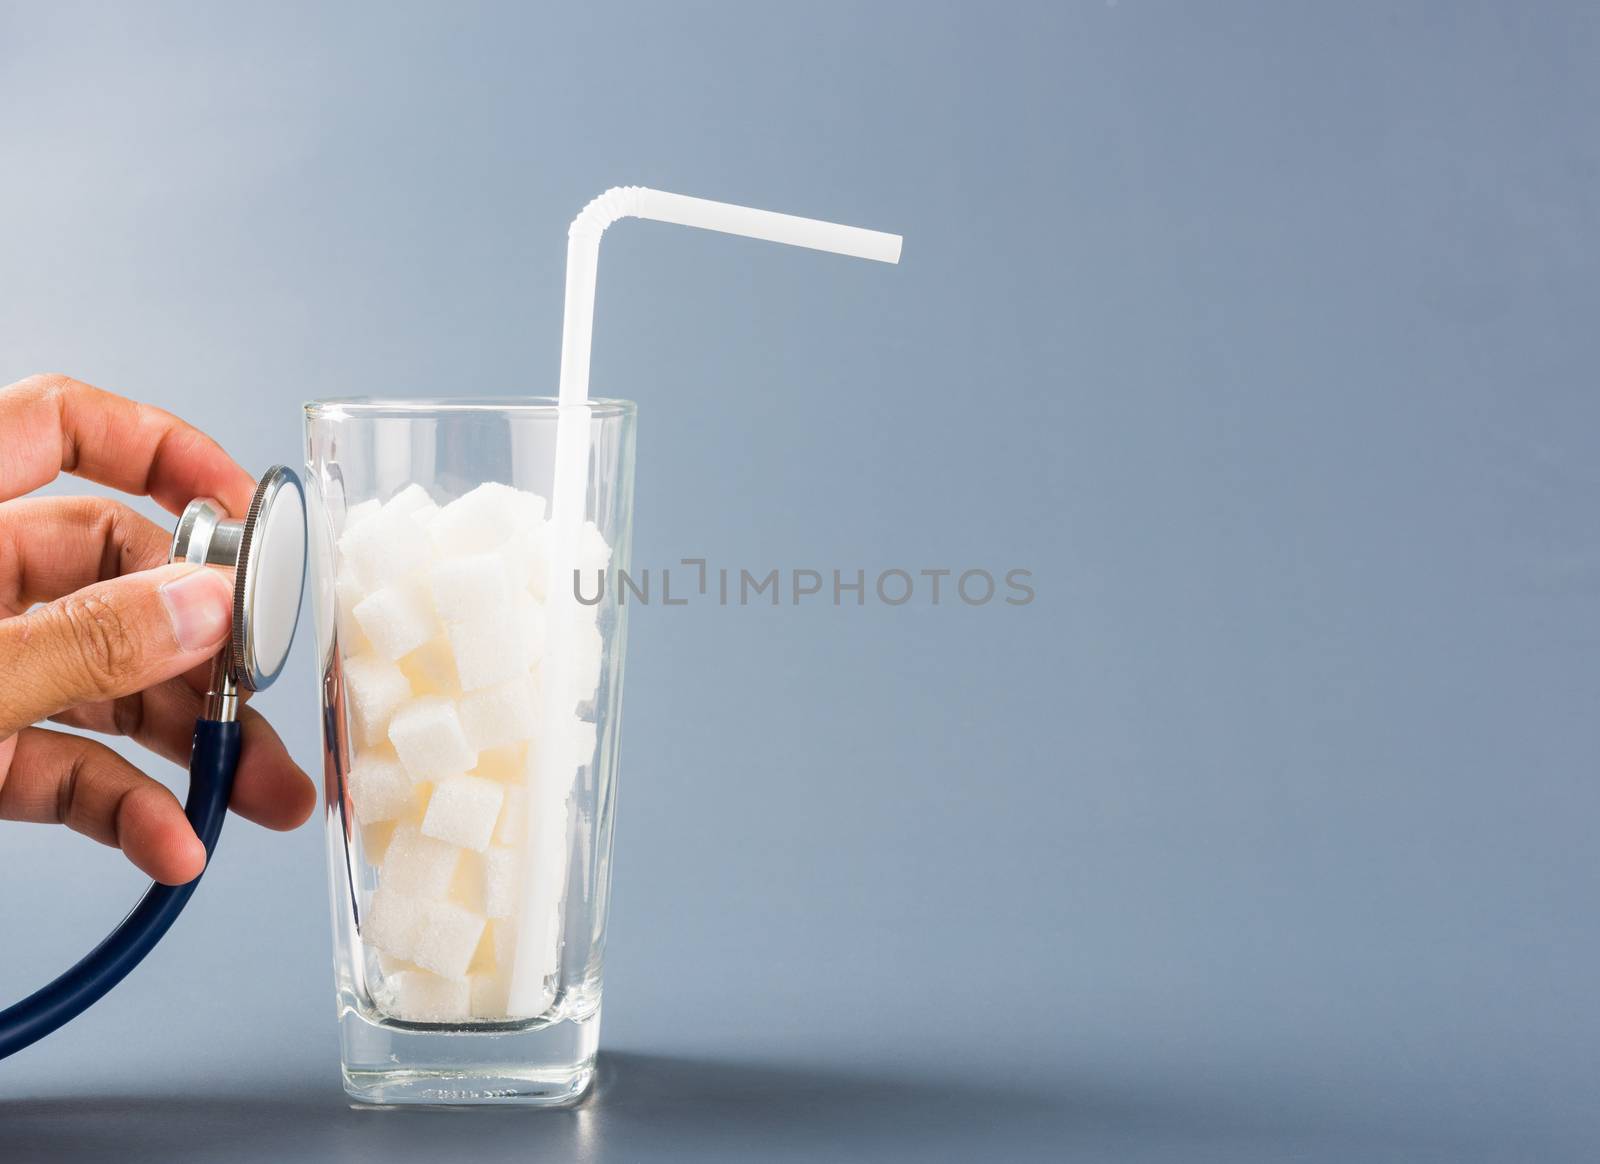 Hand of doctor hold stethoscope check on glass full of white sugar cube sweet food ingredient, isolated on gray background, health high blood risk of diabetes and calorie intake unhealthy drink